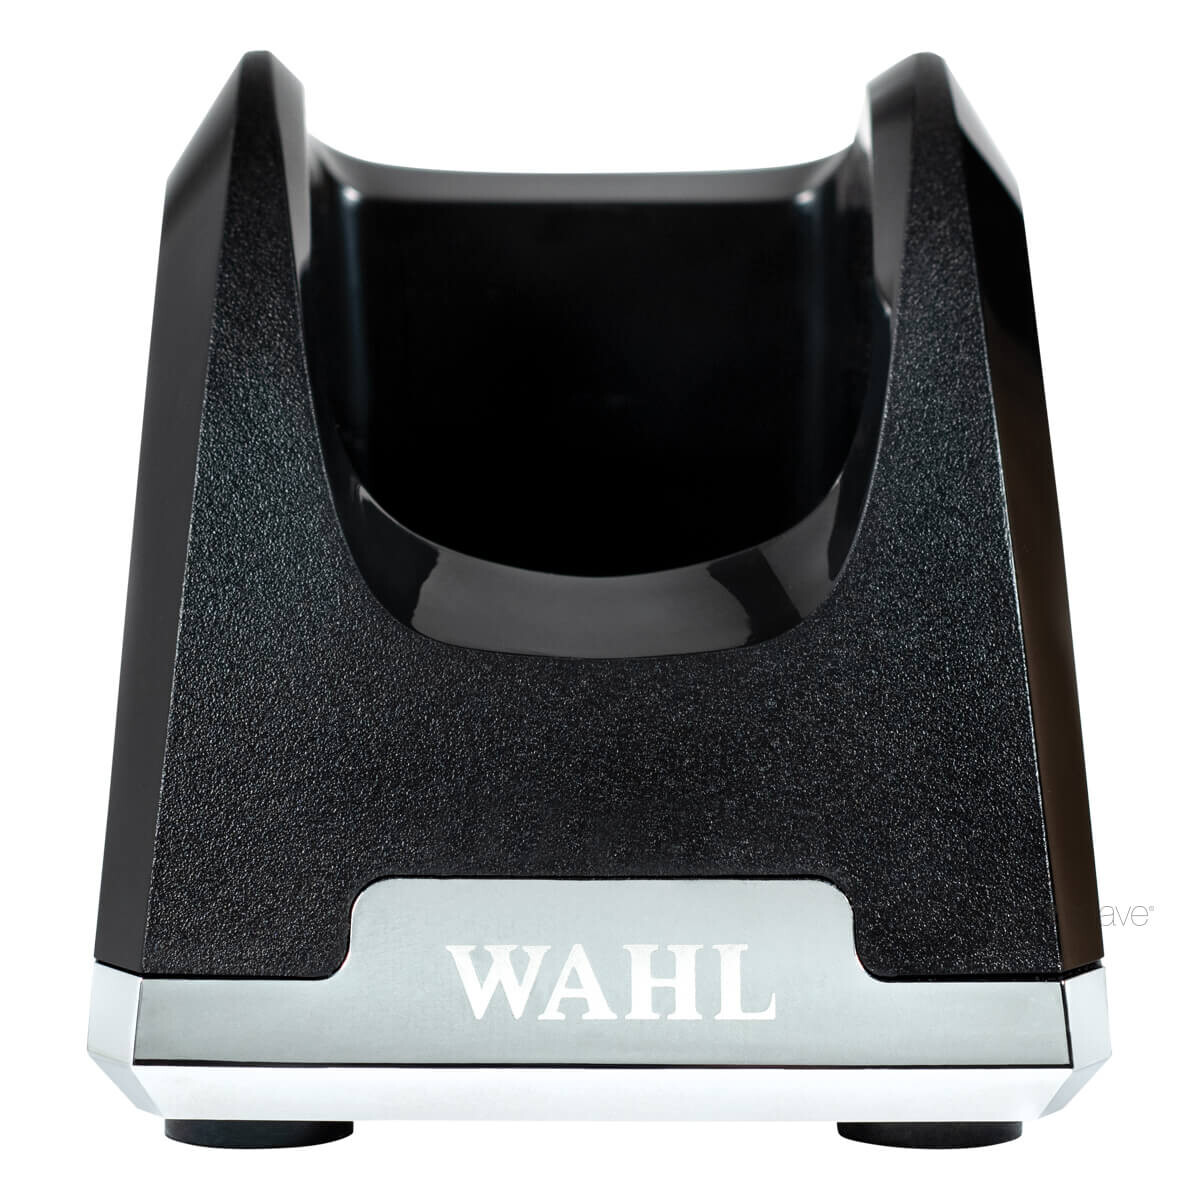 Billede af Wahl Professional Charge Stand Cordless Clippers